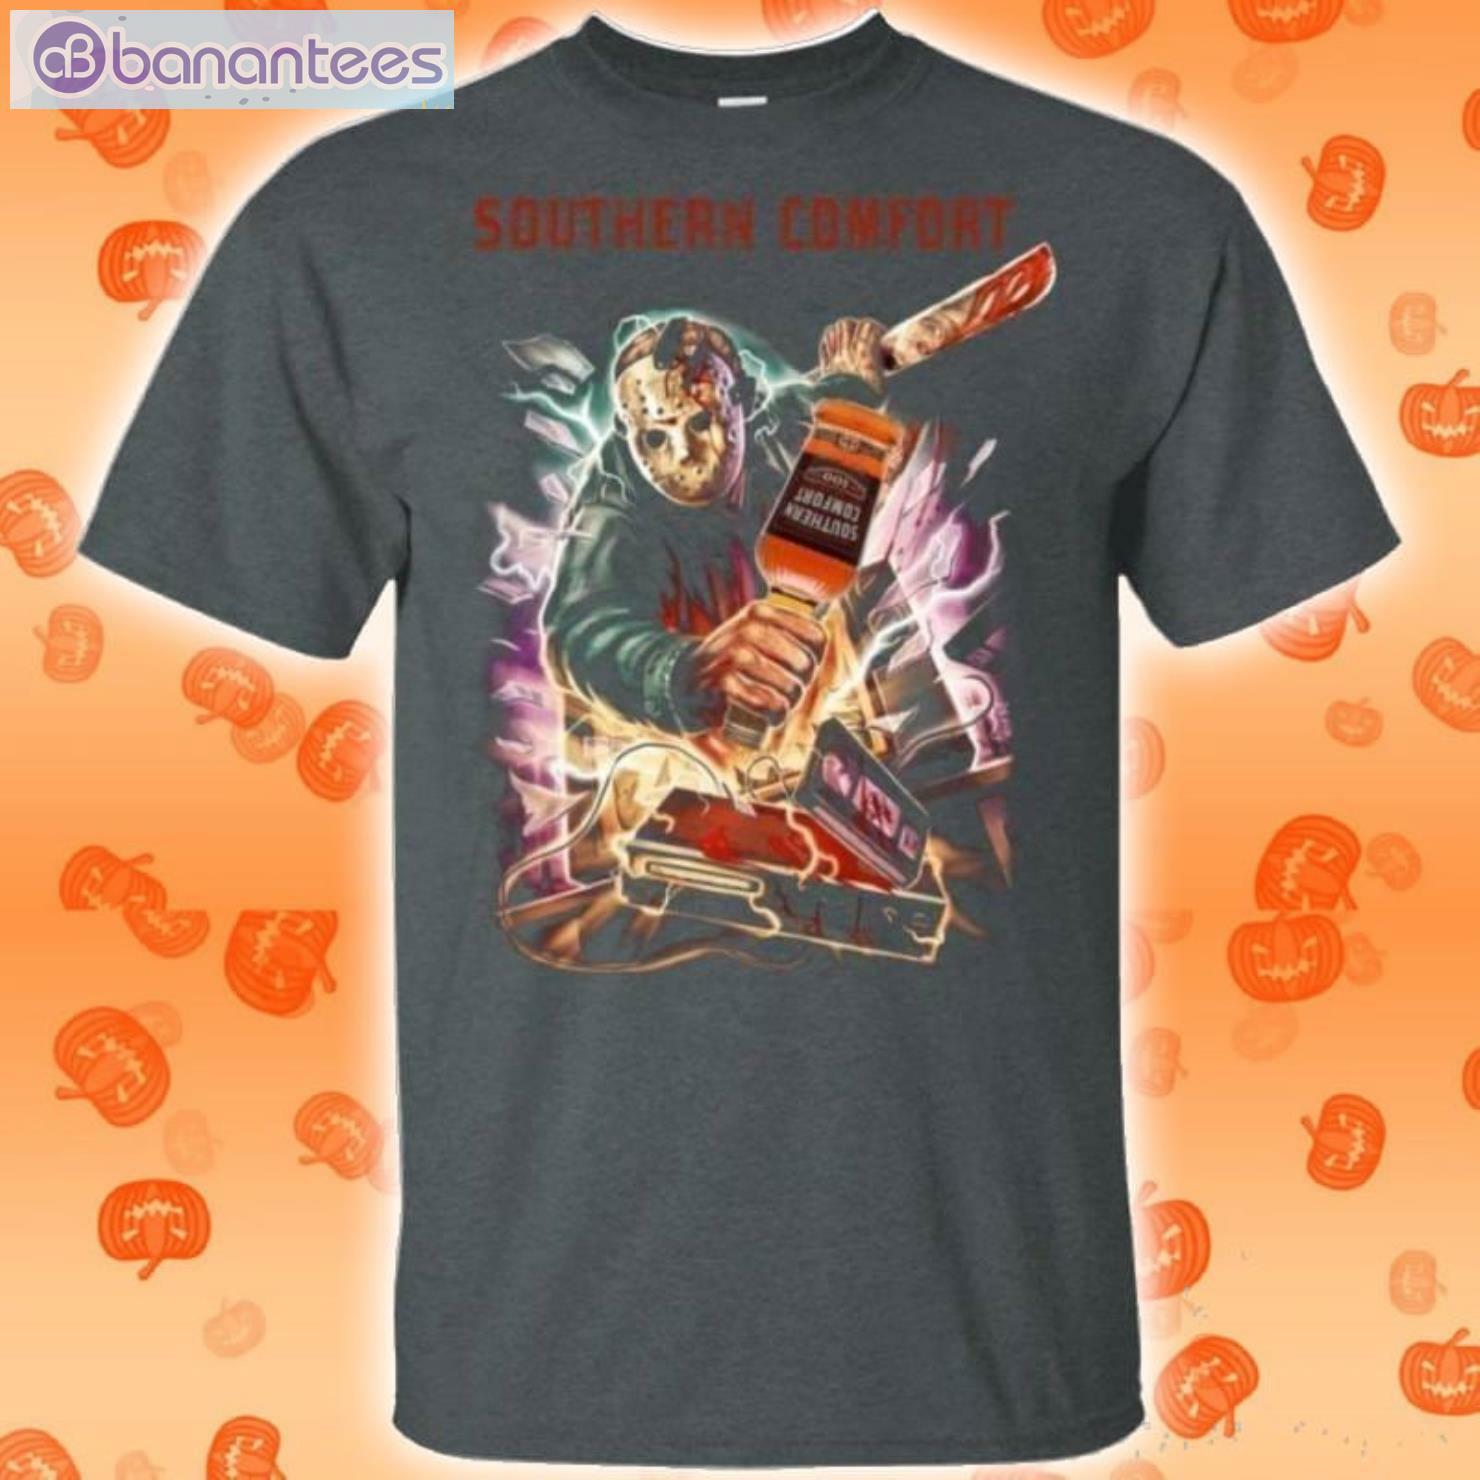 Jason Voorhees And Southern Comfort Whisky Halloween T-Shirt Product Photo 2 Product photo 2